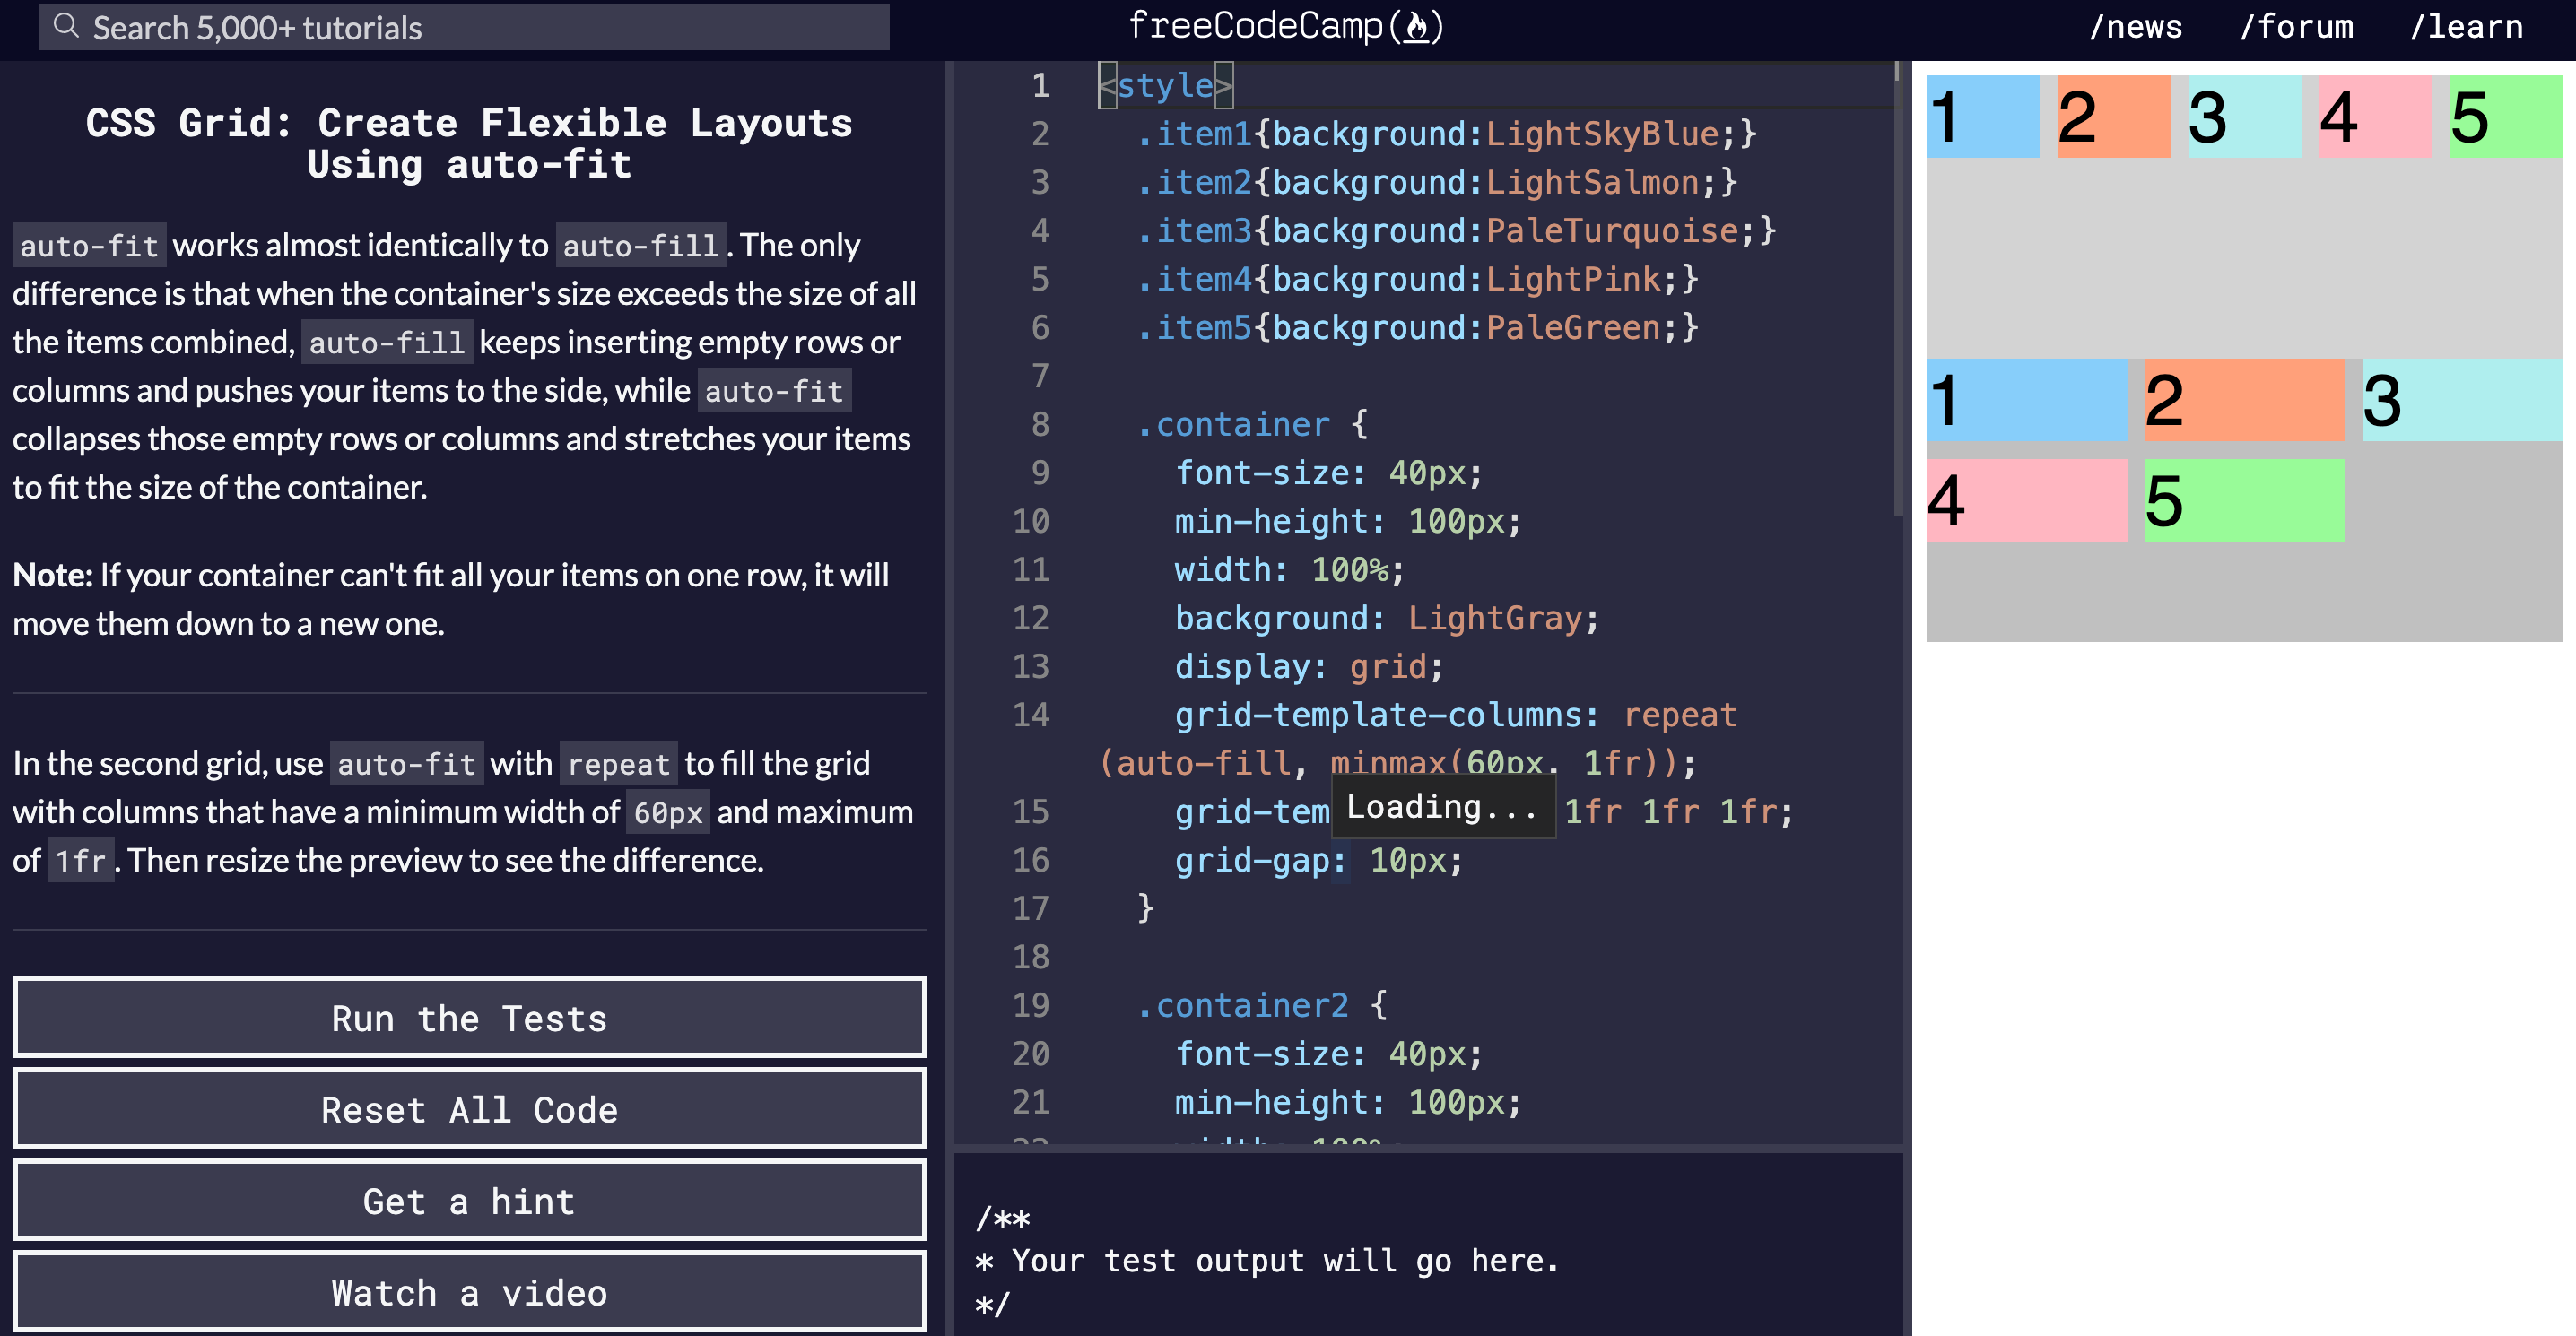 Learn_CSS_Grid__Create_Flexible_Layouts_Using_auto-fit___freeCodeCamp_org-2